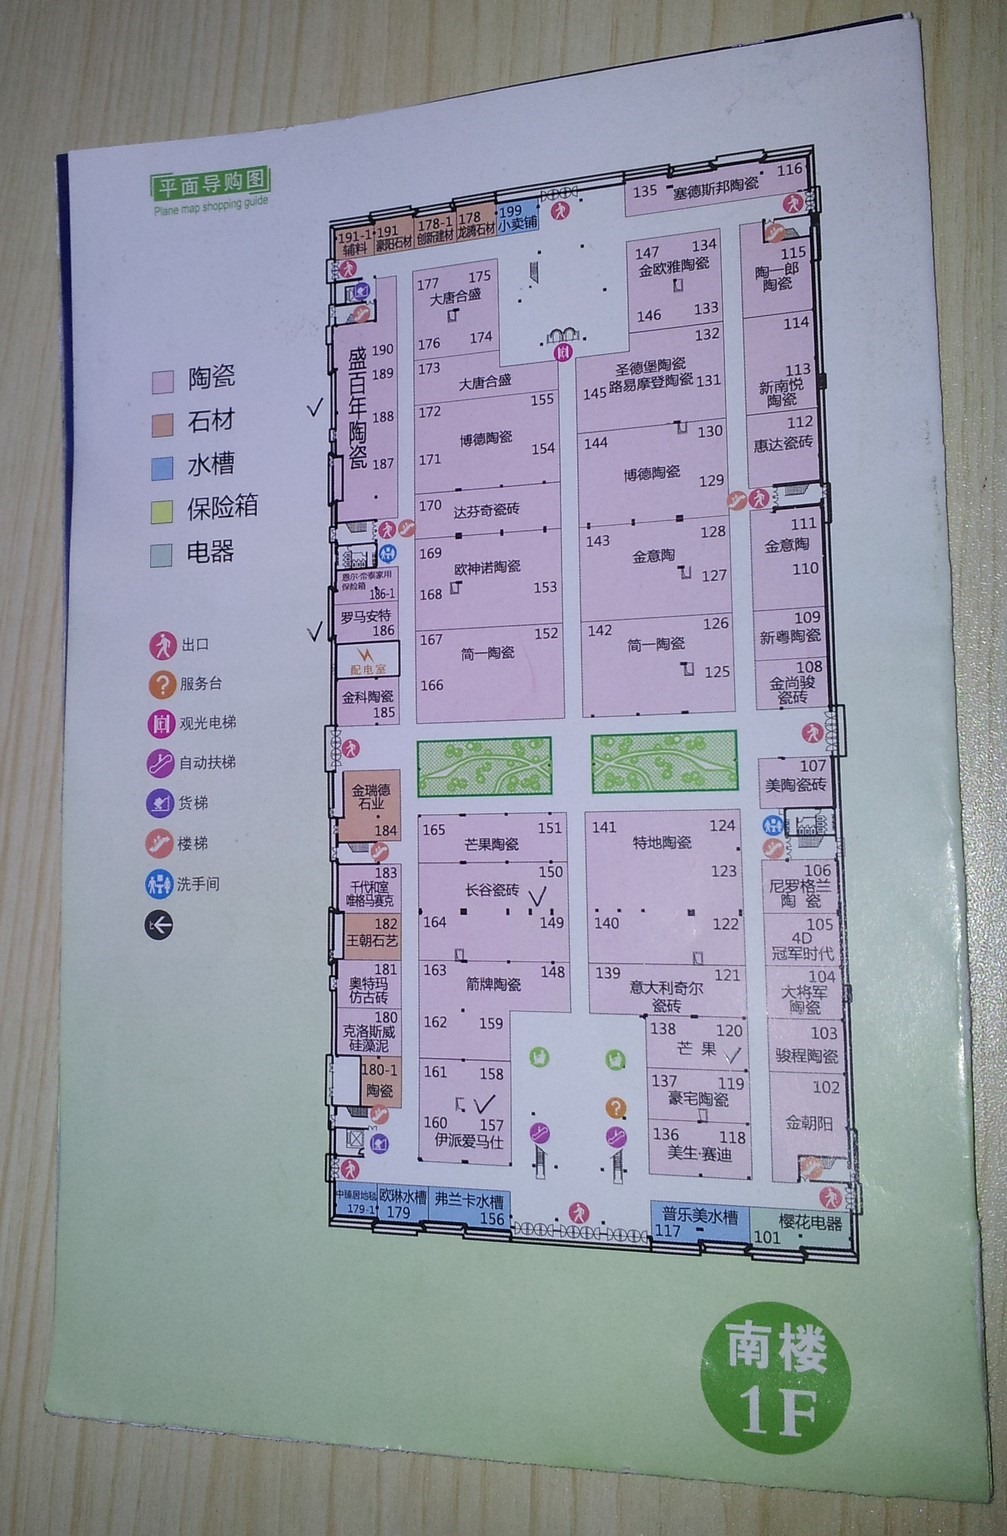 plane guild map for east ave haodejia south build floor number one 